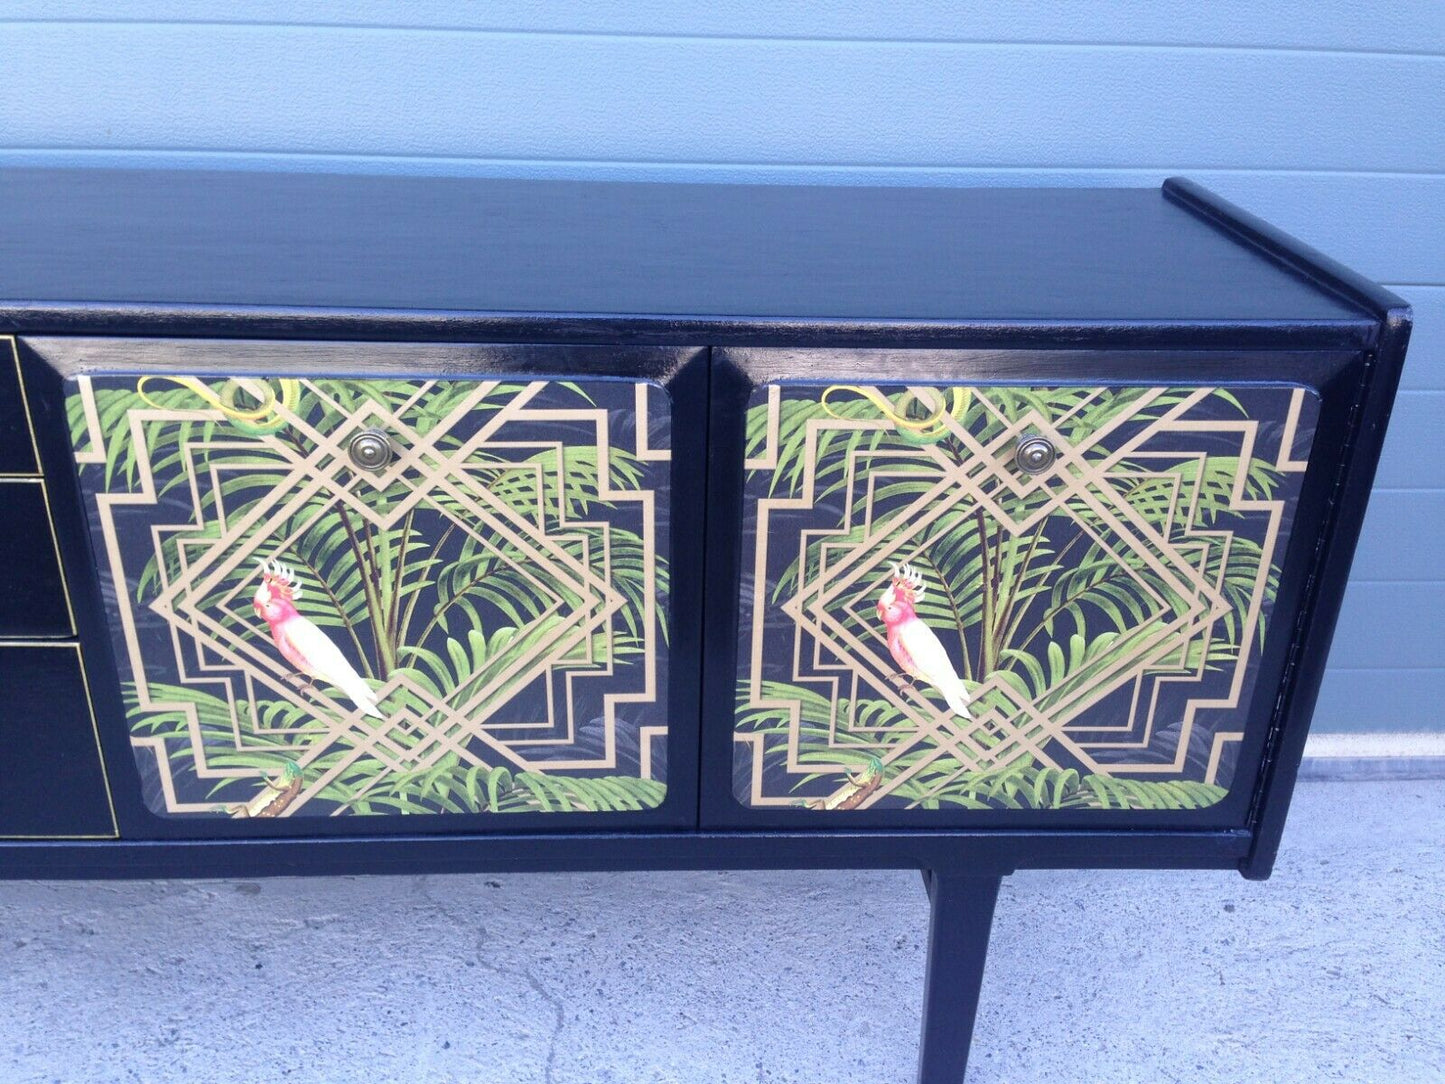 232.....Stunning Retro Sideboard Refinished In Black And Decoupage Decoration ( SOLD  )